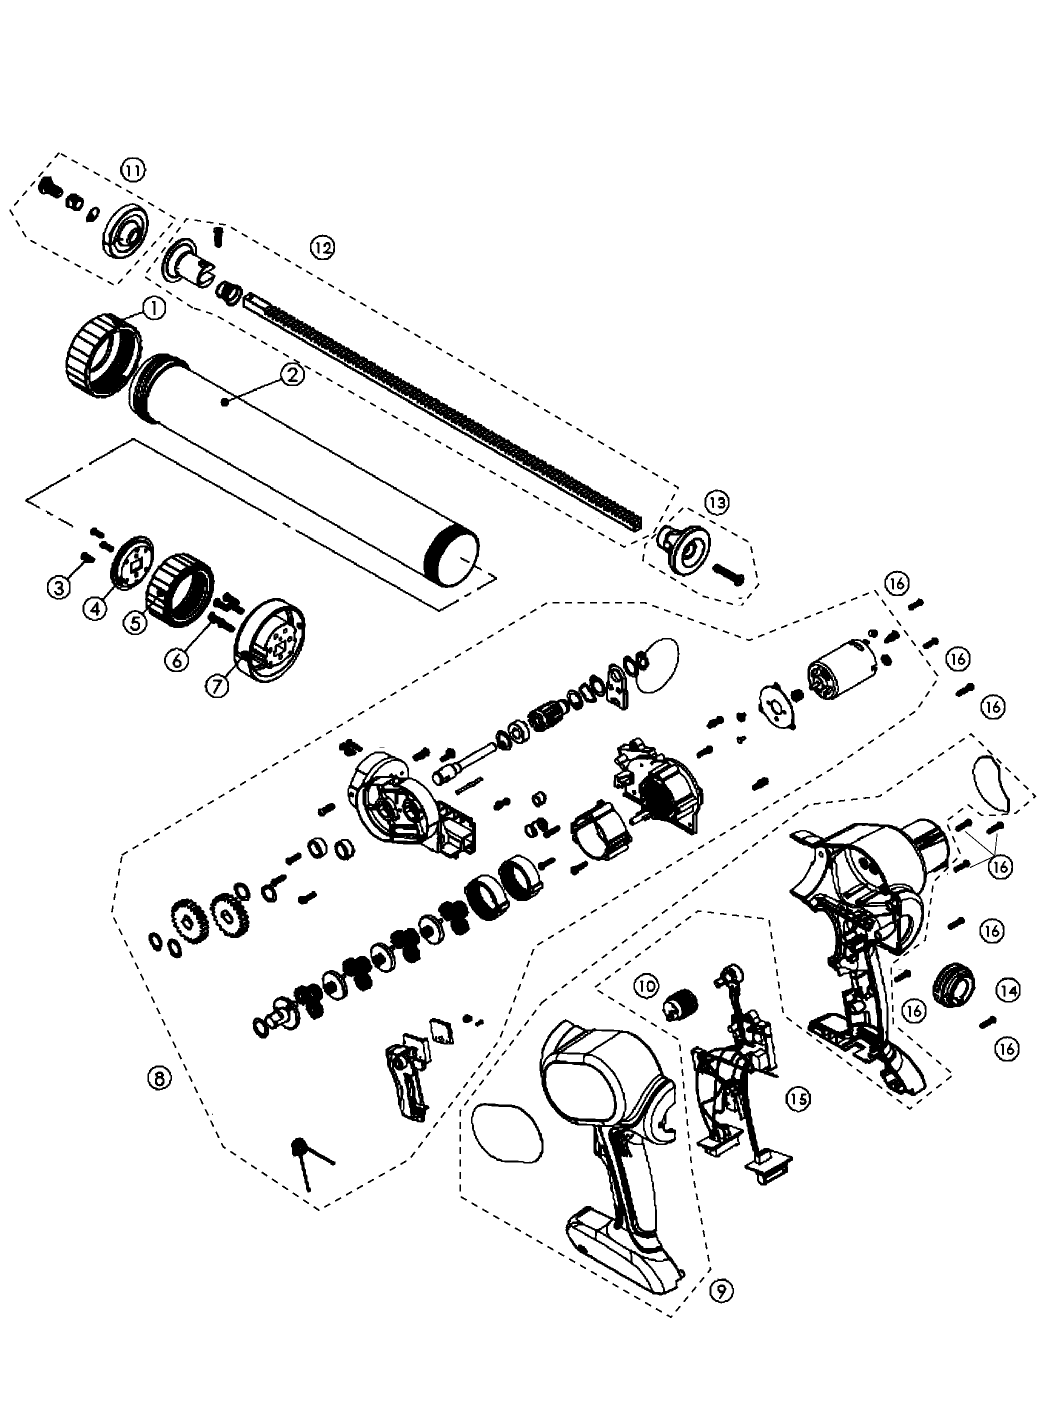 EY3641: Exploded View